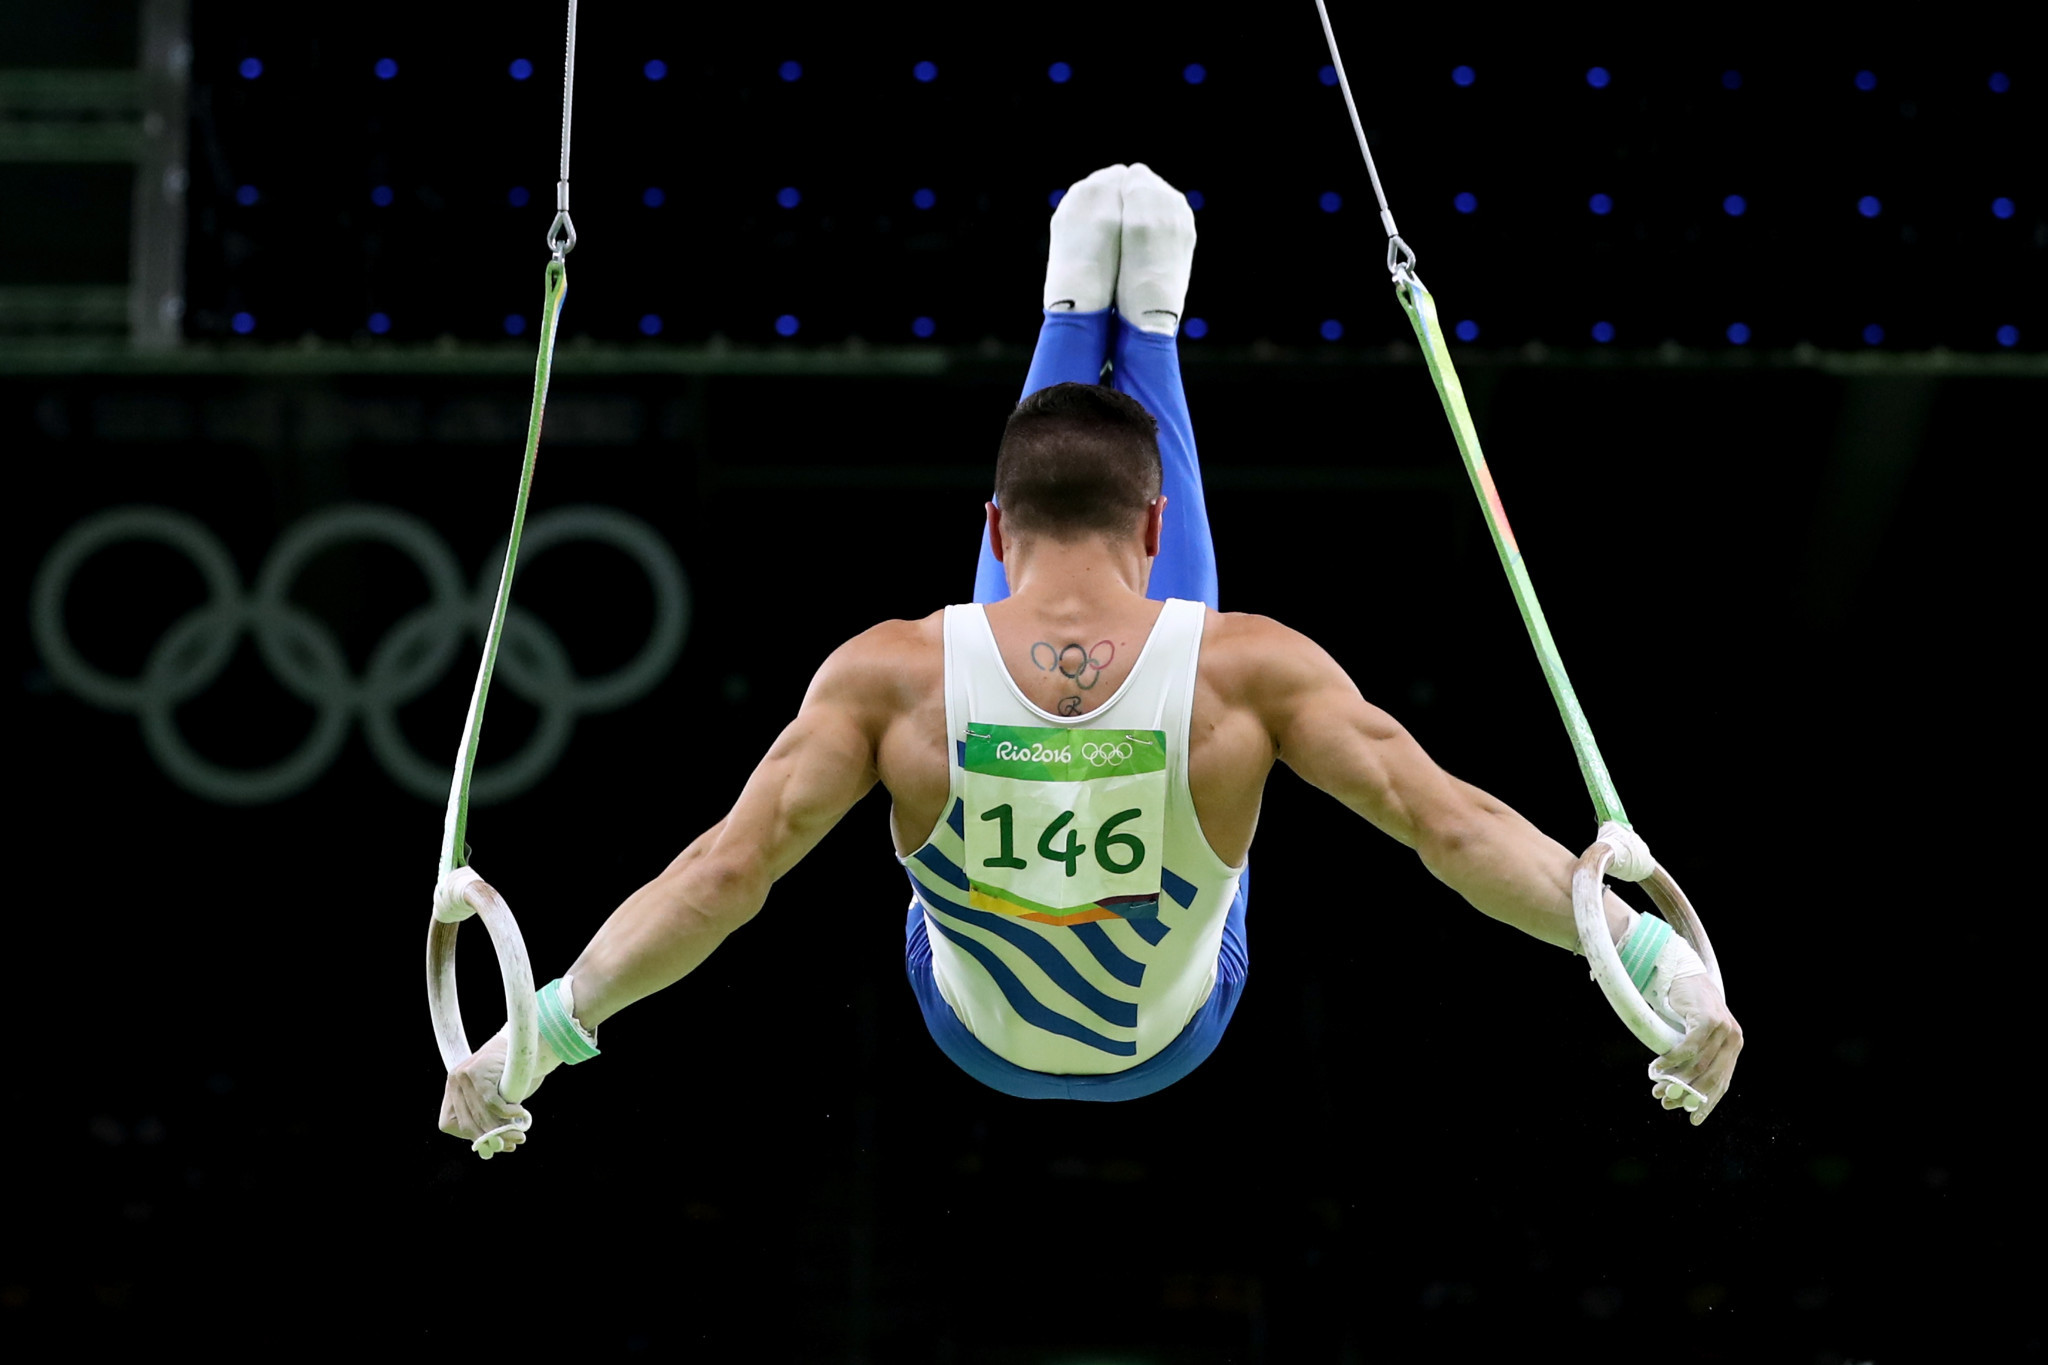 Eleftherios Petrounias won gold on the rings at Rio 2016  ©Getty Images